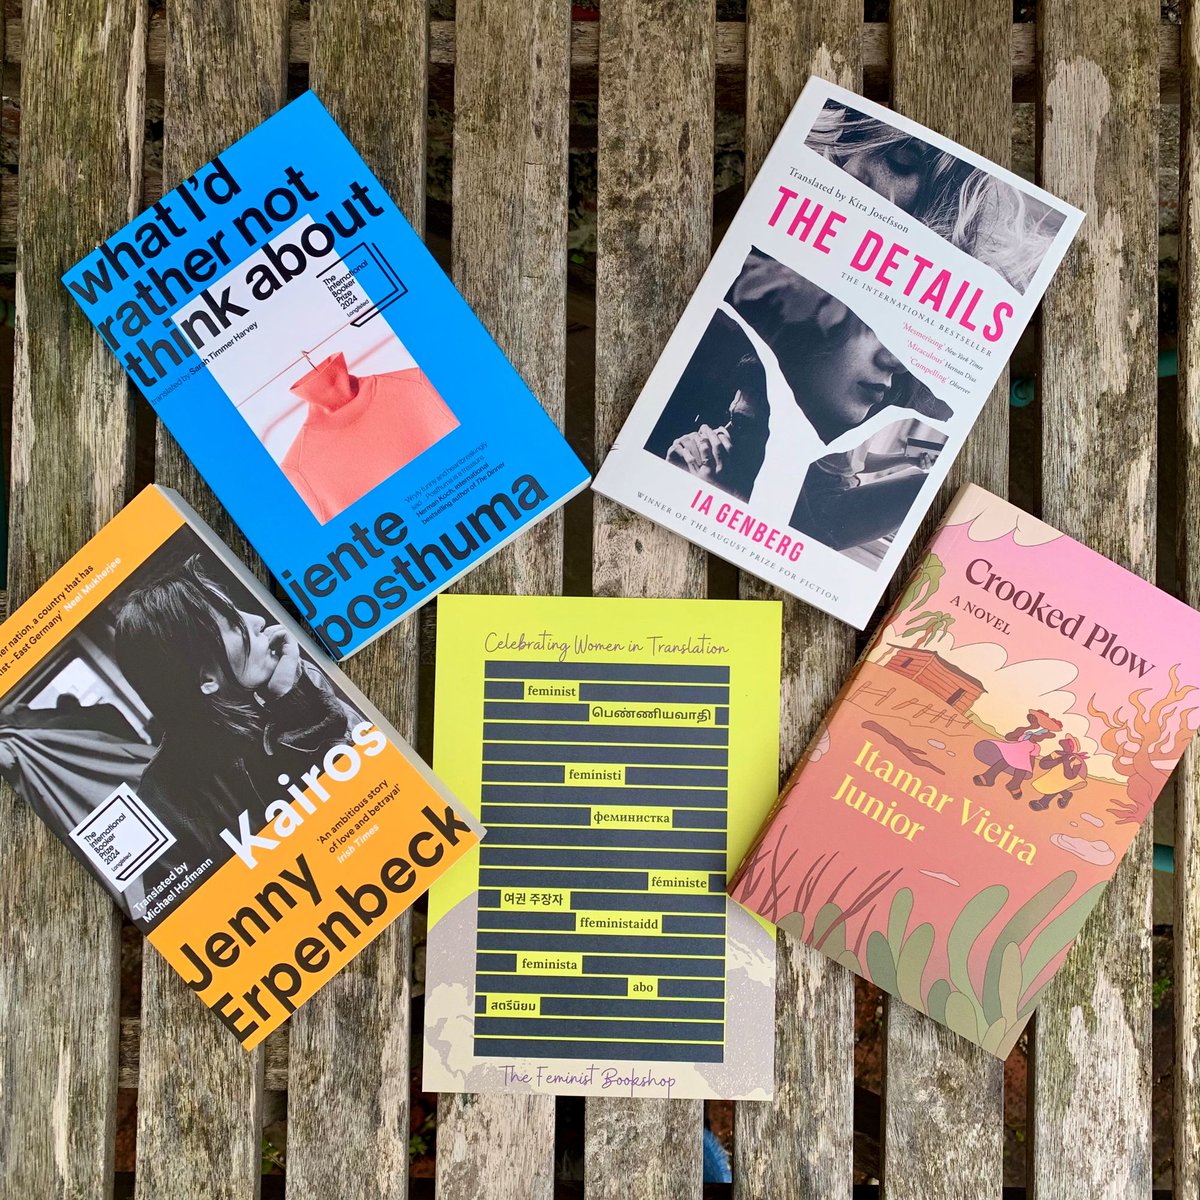 Today, we wanted to celebrate our translated fiction collection by spotlighting @TheBookerPrizes shortlist🌼We also have copies of our exclusive Women in Translation design ✨Not pictured, but back soon: Not a River & Mater 2-10📚